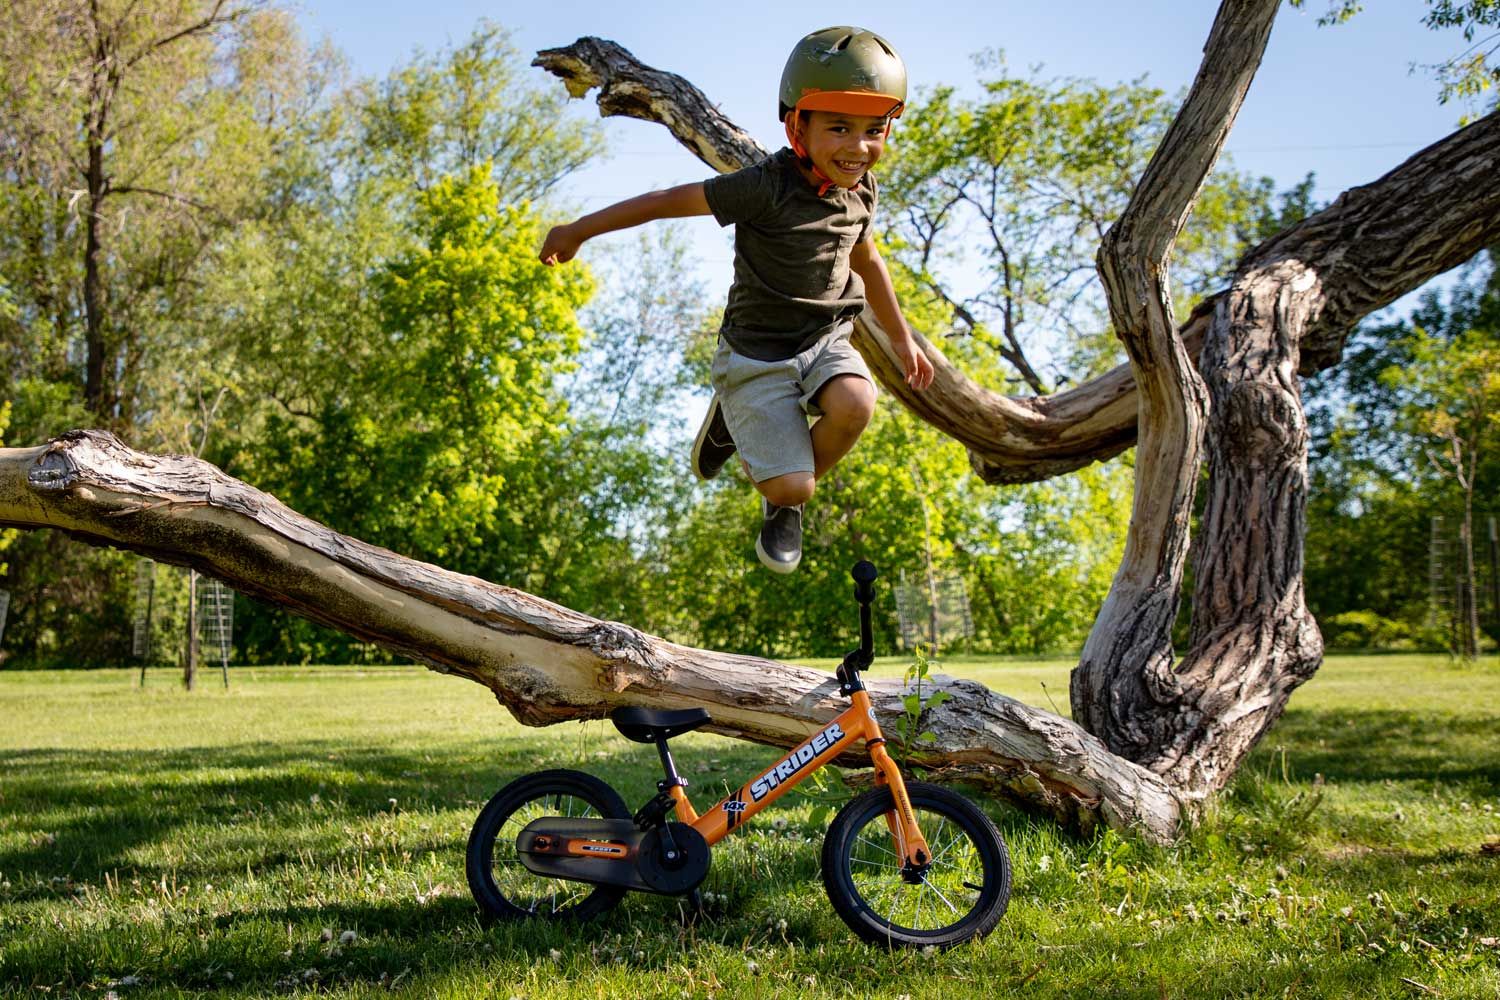 A child jumping over an orange Strider 14x pedal bike